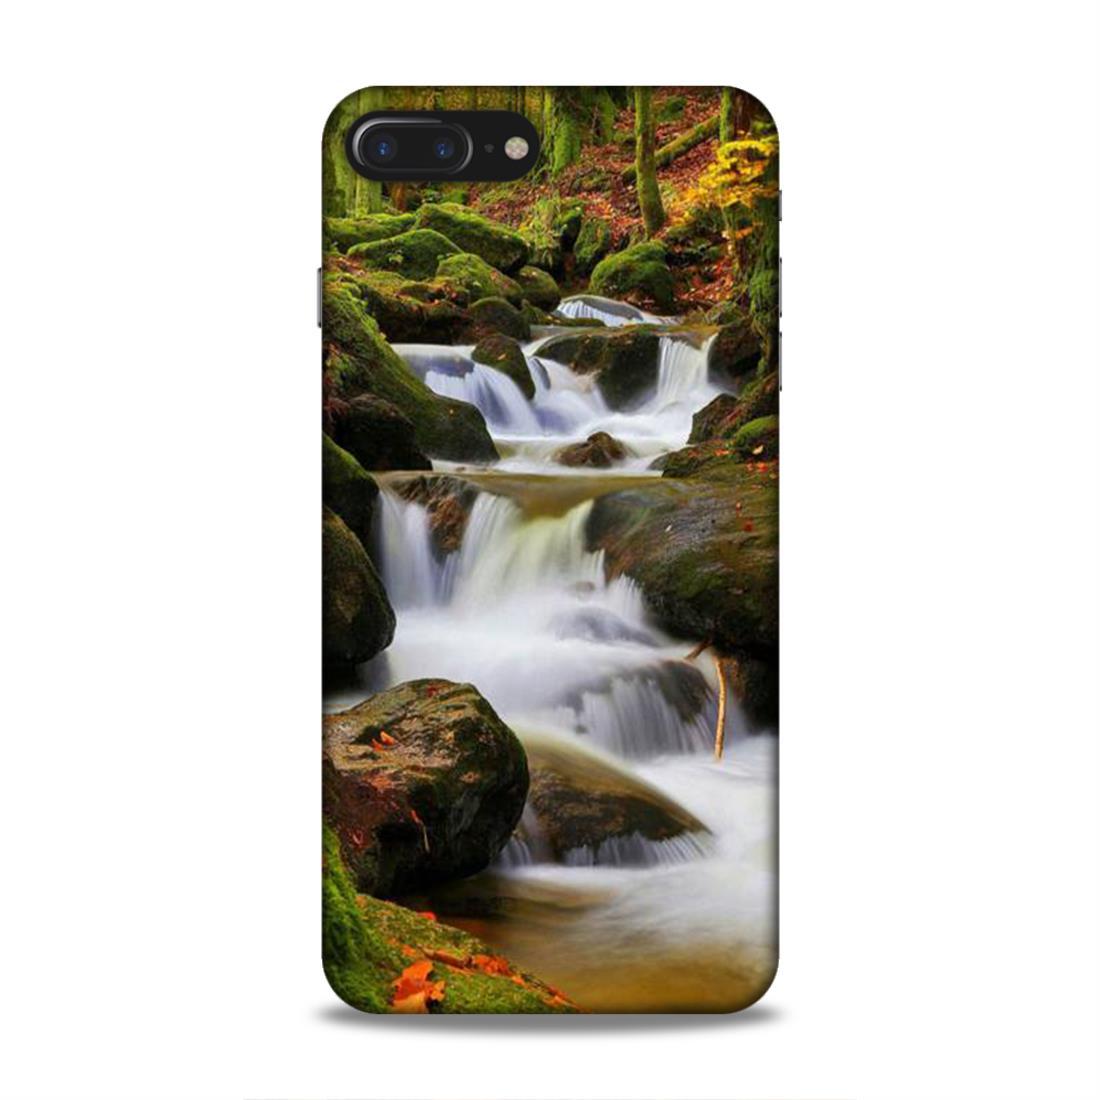 Natural Waterfall iPhone 8 Plus Phone Cover Case